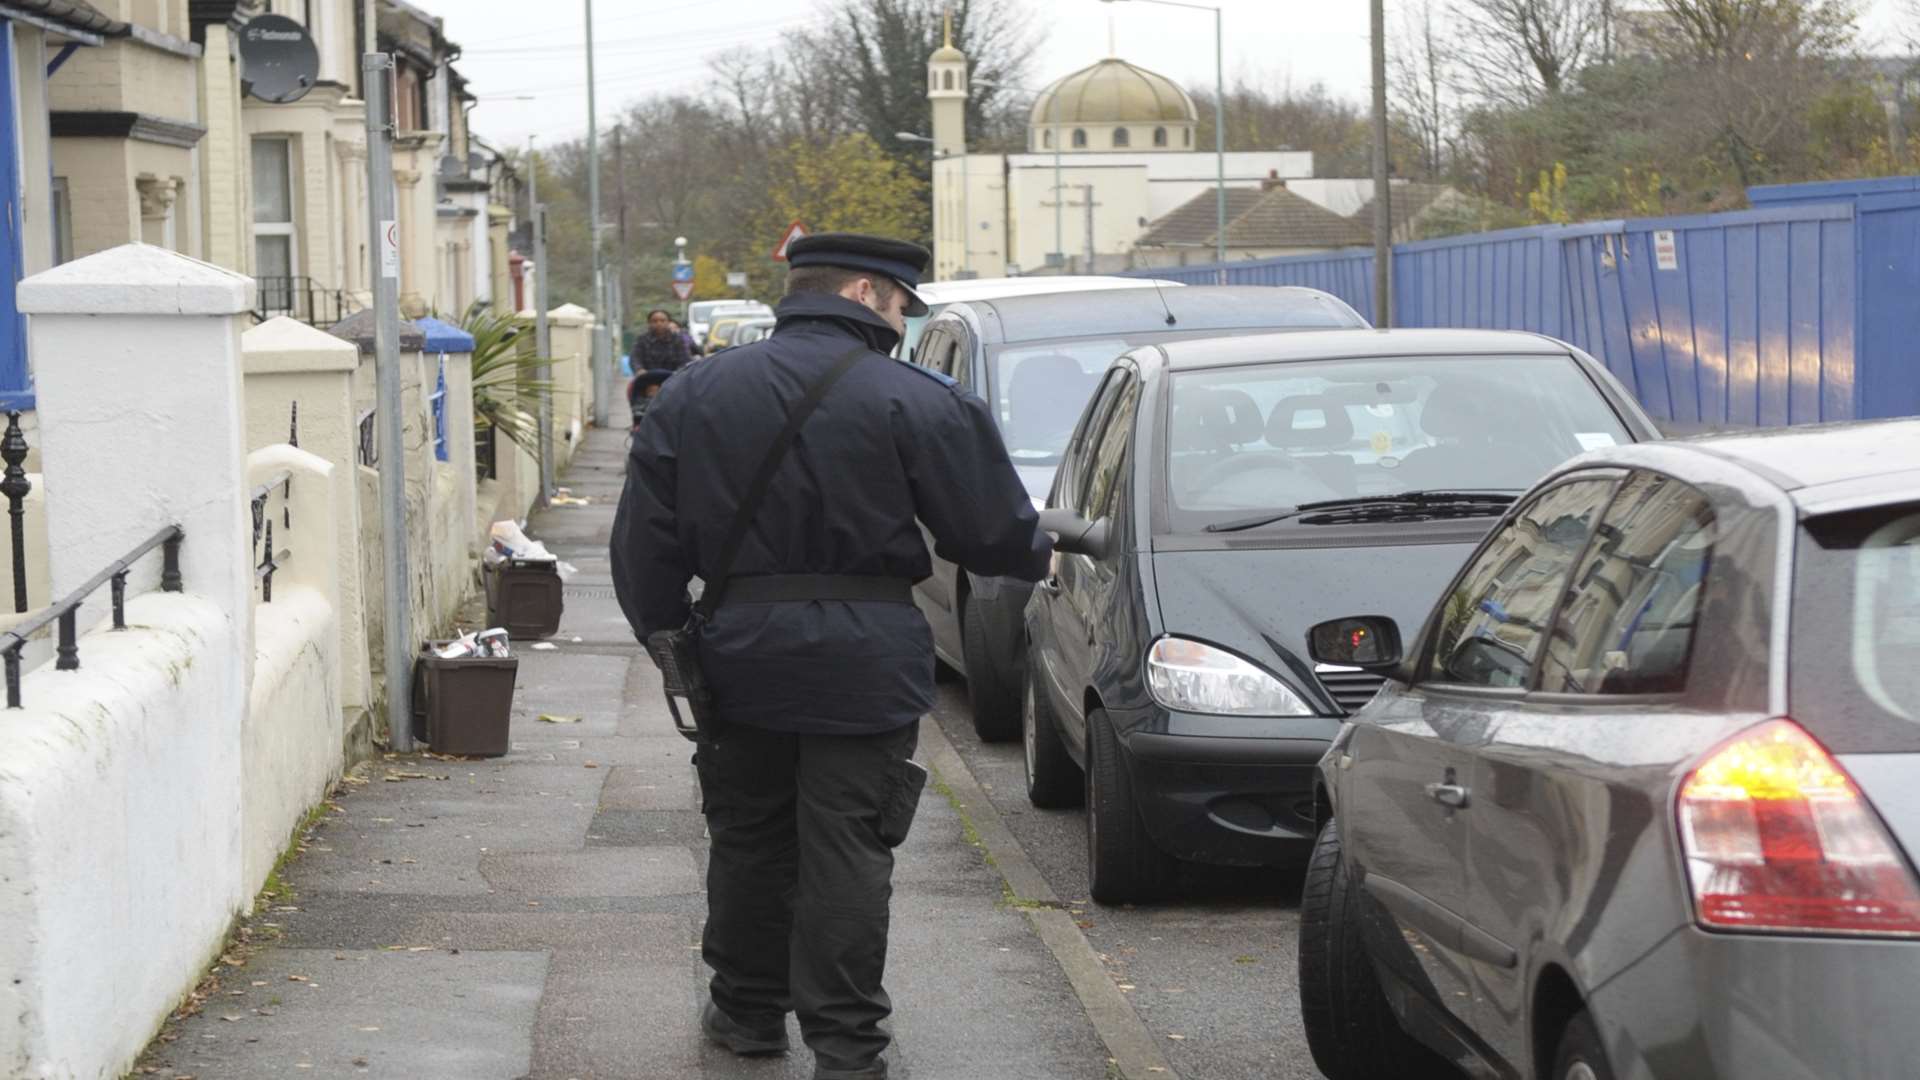 Parking wardens are most likely victim of attacks